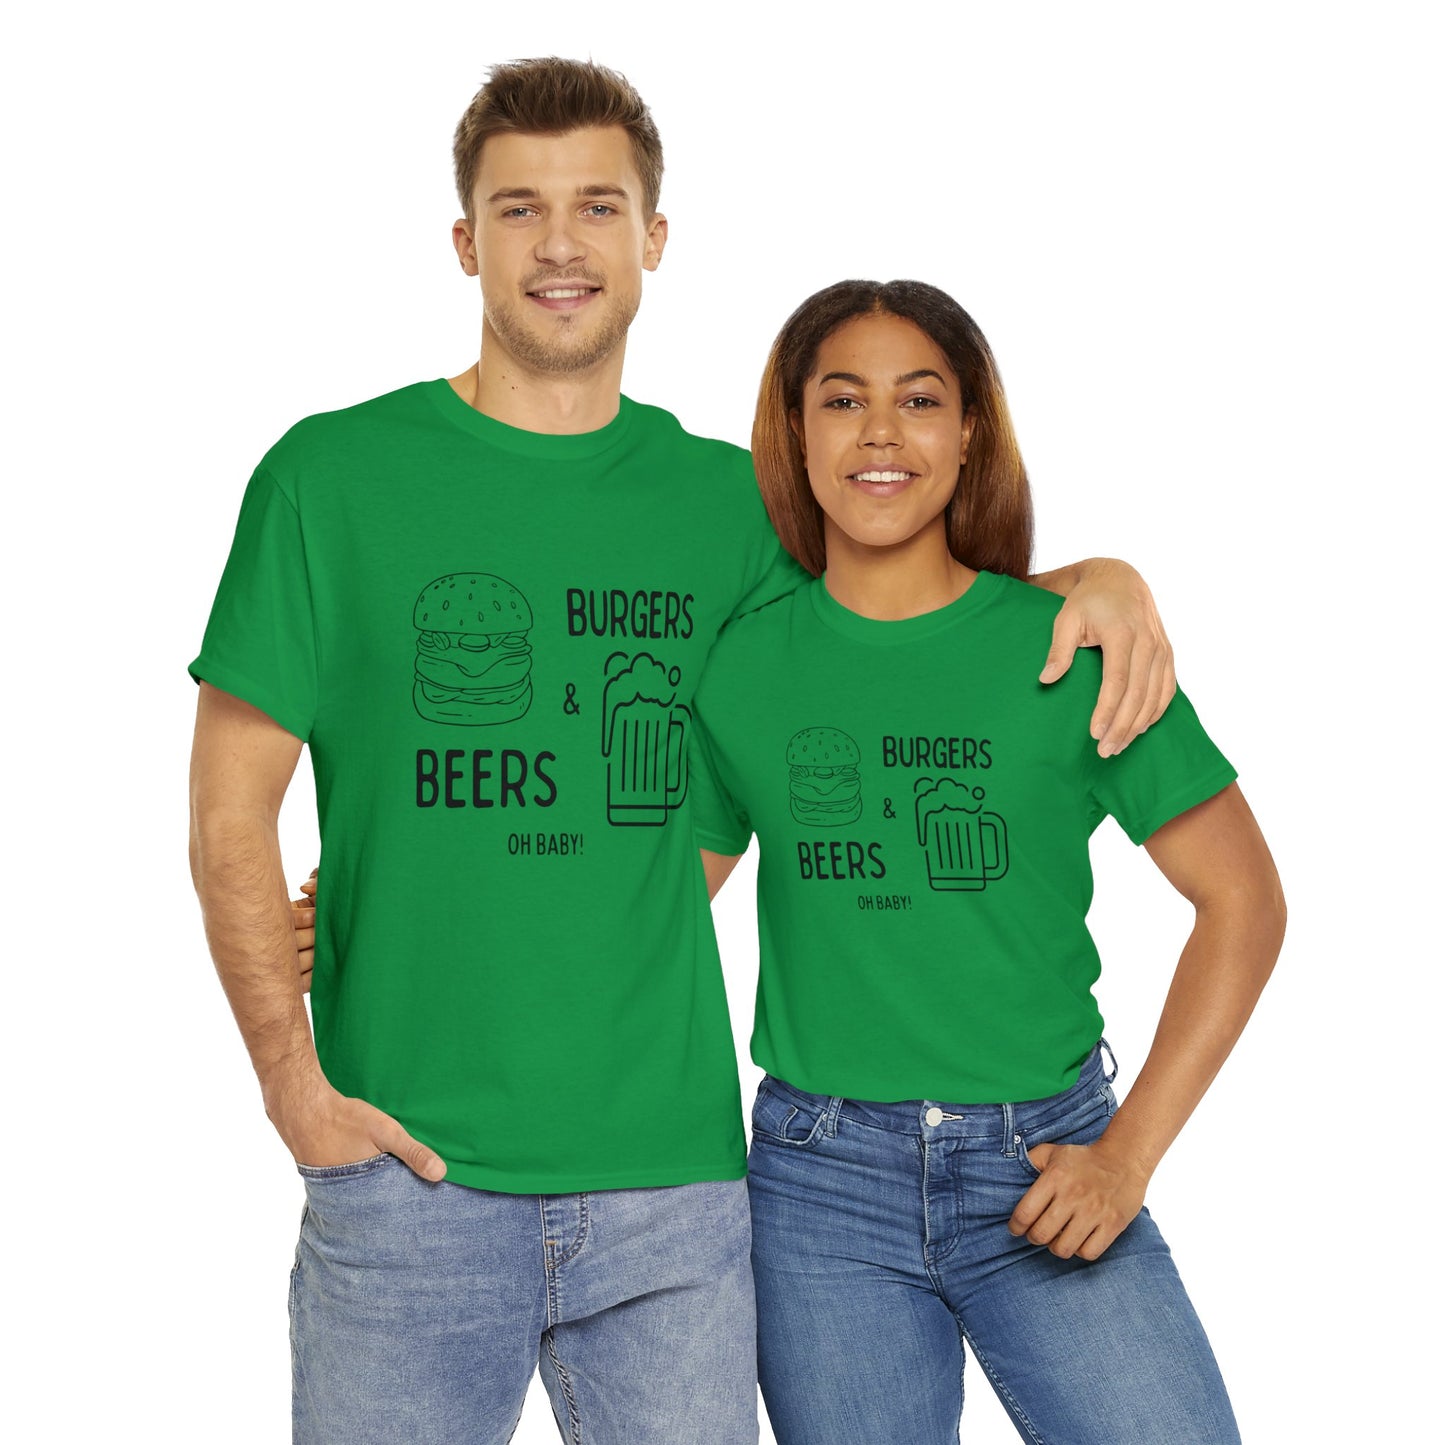 Burgers and Beers Oh Baby! T Shirt